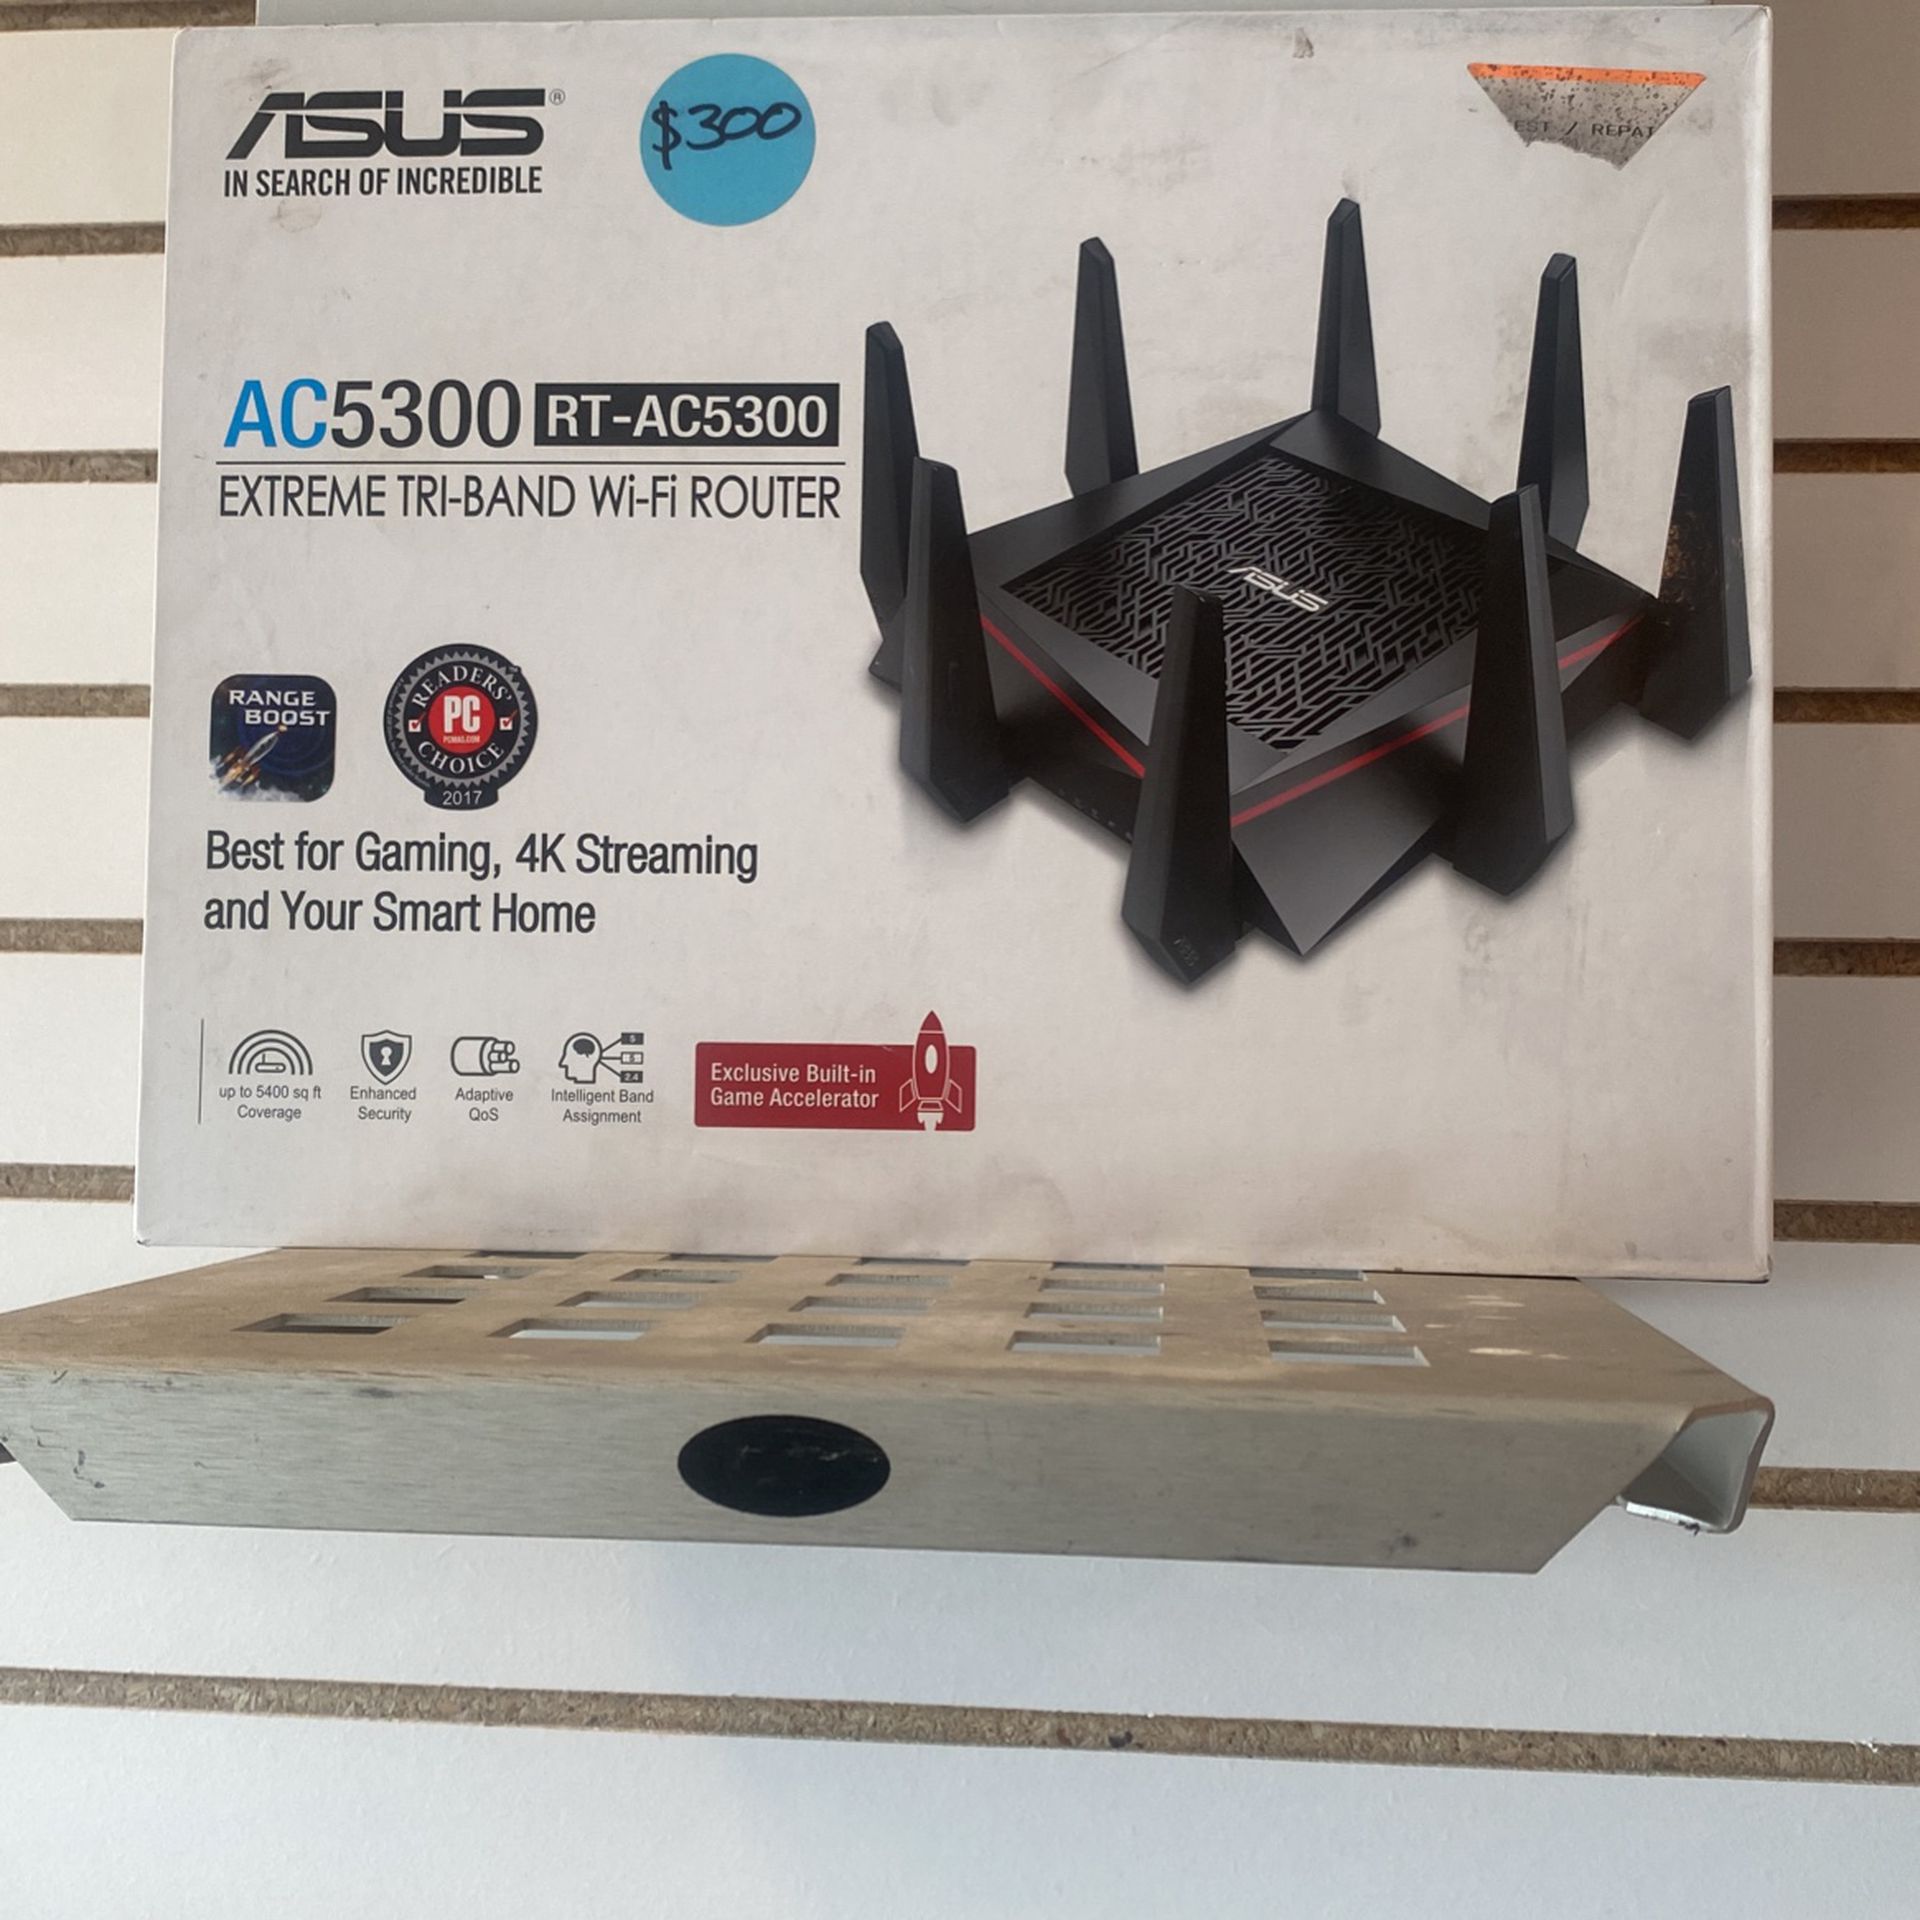 Asus AC 5300 Extreme Tri-band WiFi Router